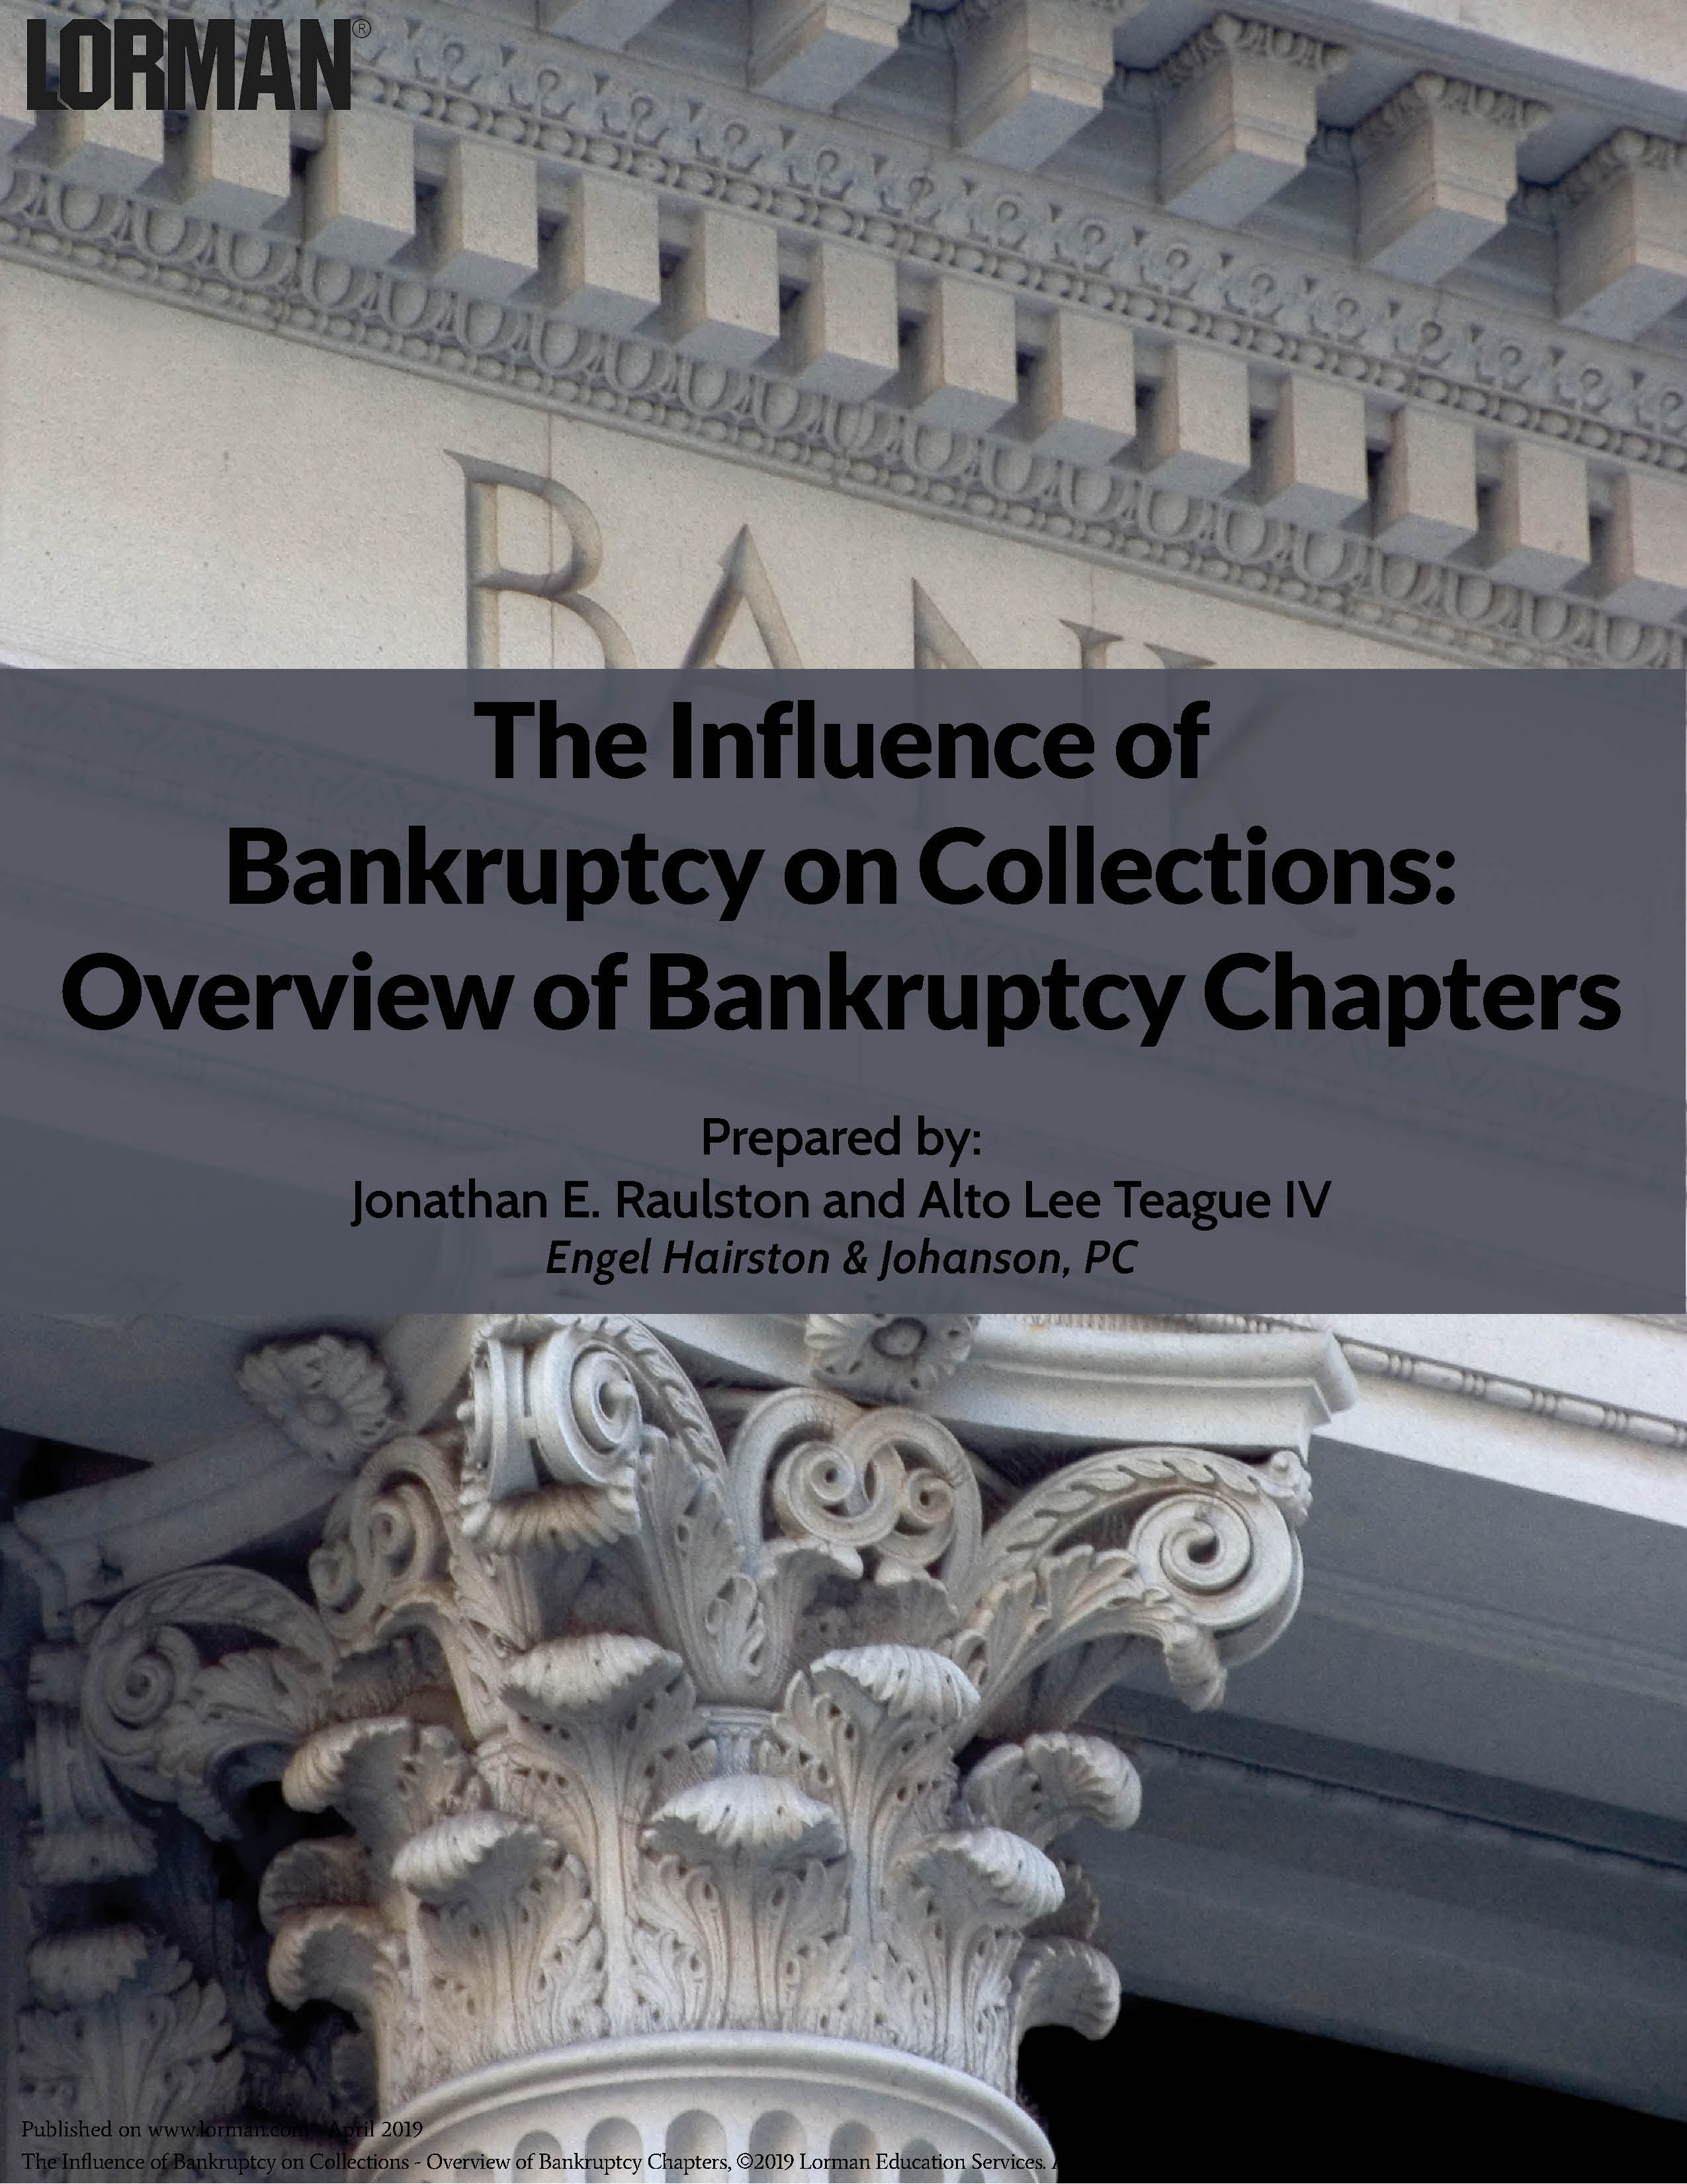 The Influence of Bankruptcy on Collections - Overview of Bankruptcy Chapters